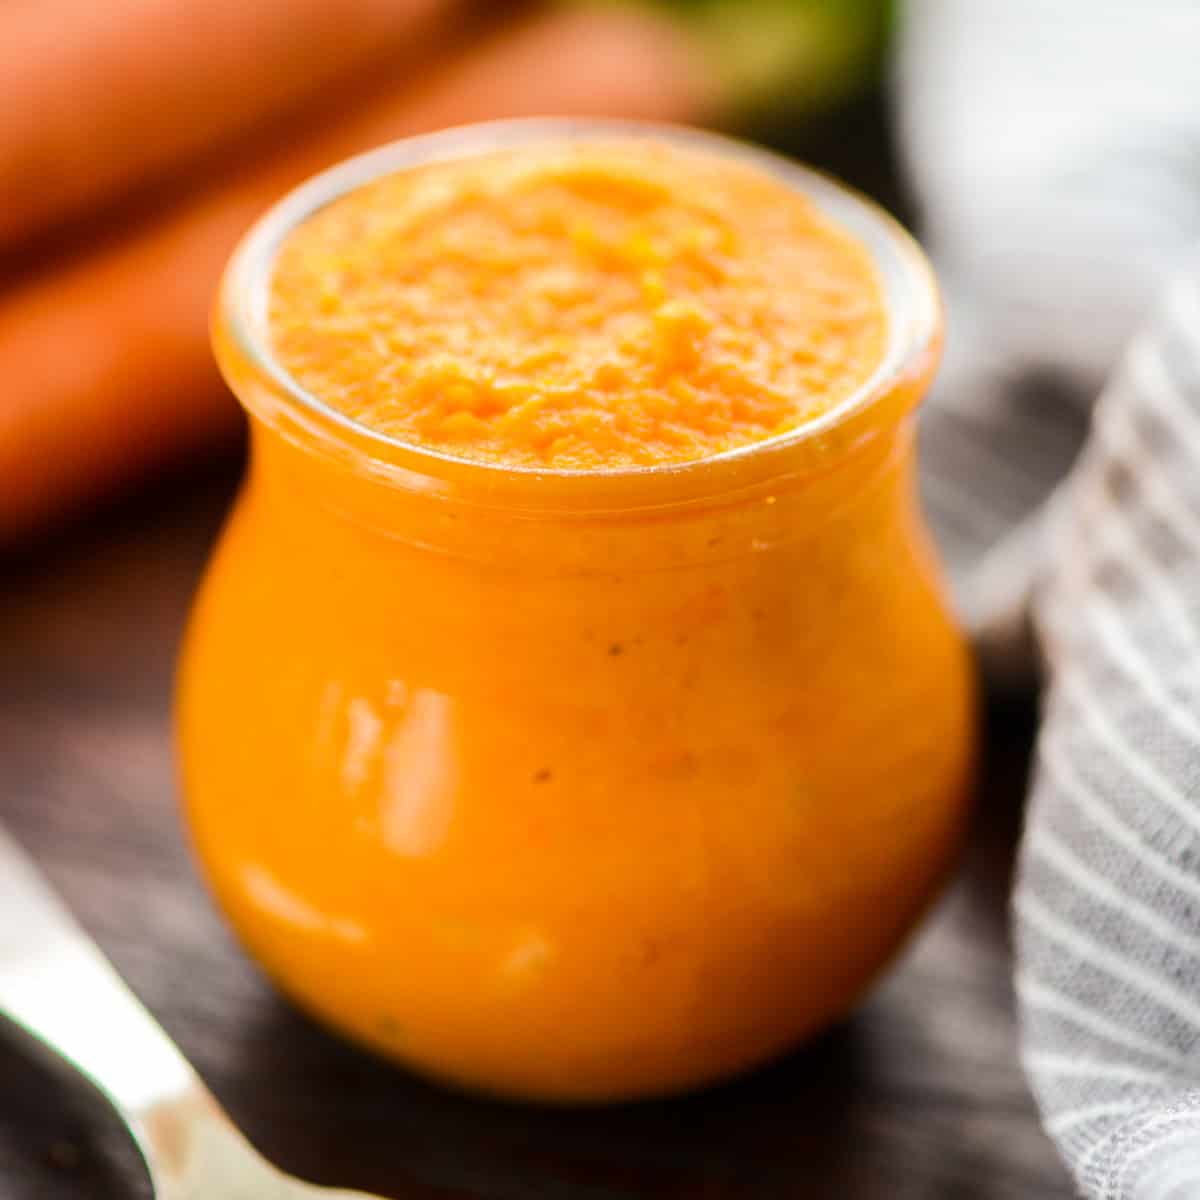 Homemade Baby Food Carrots in a glass jar